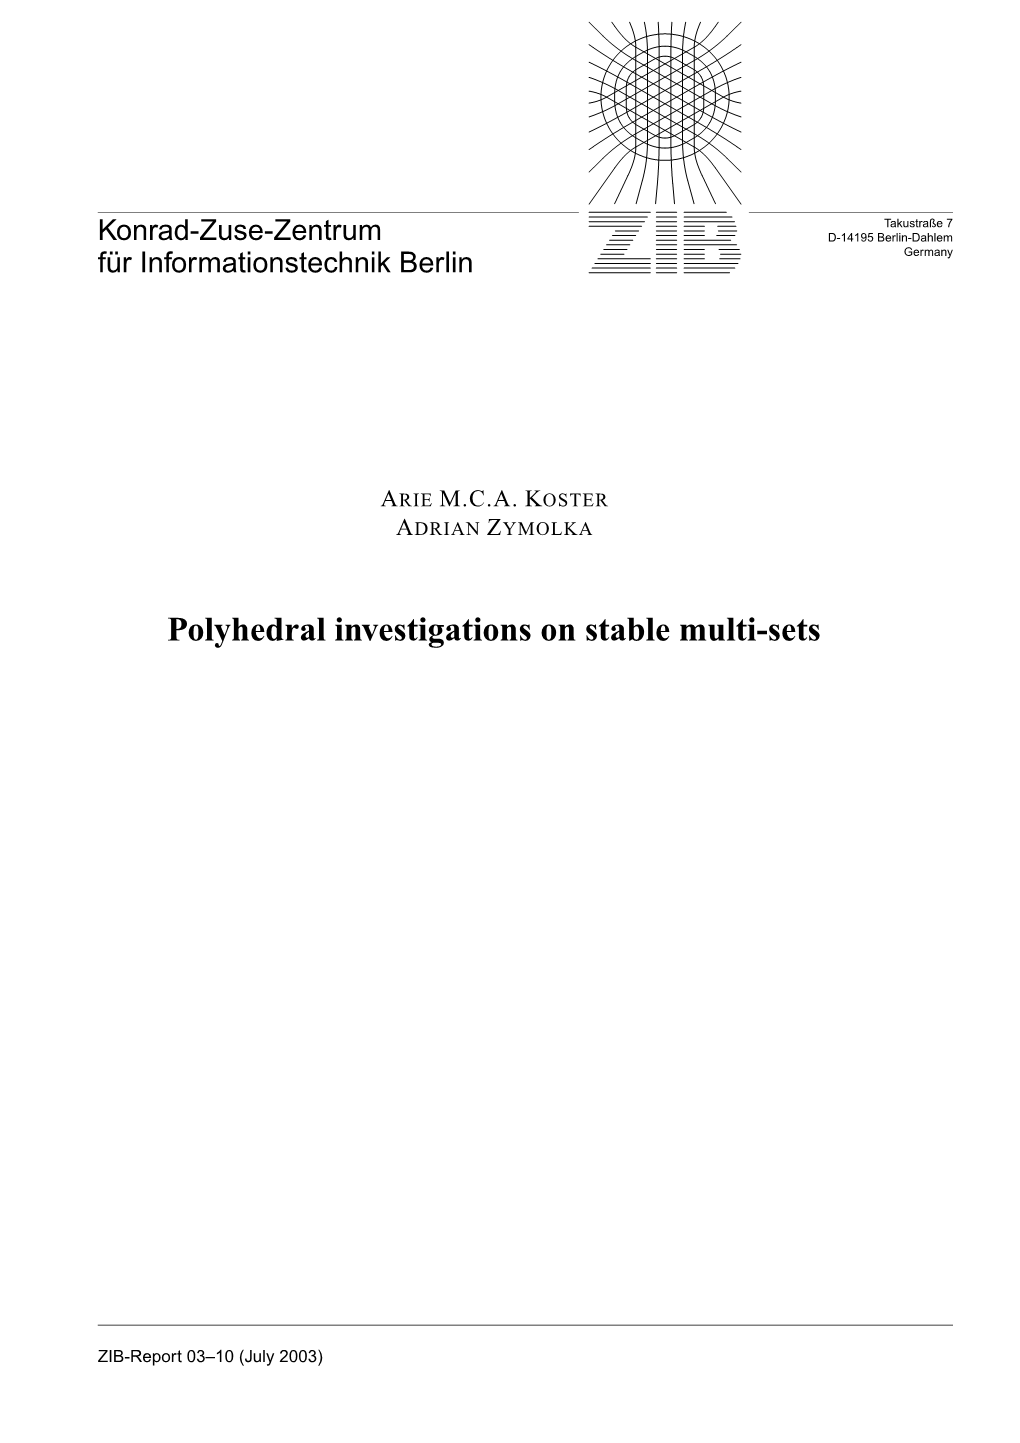 Polyhedral Investigations on Stable Multi-Sets